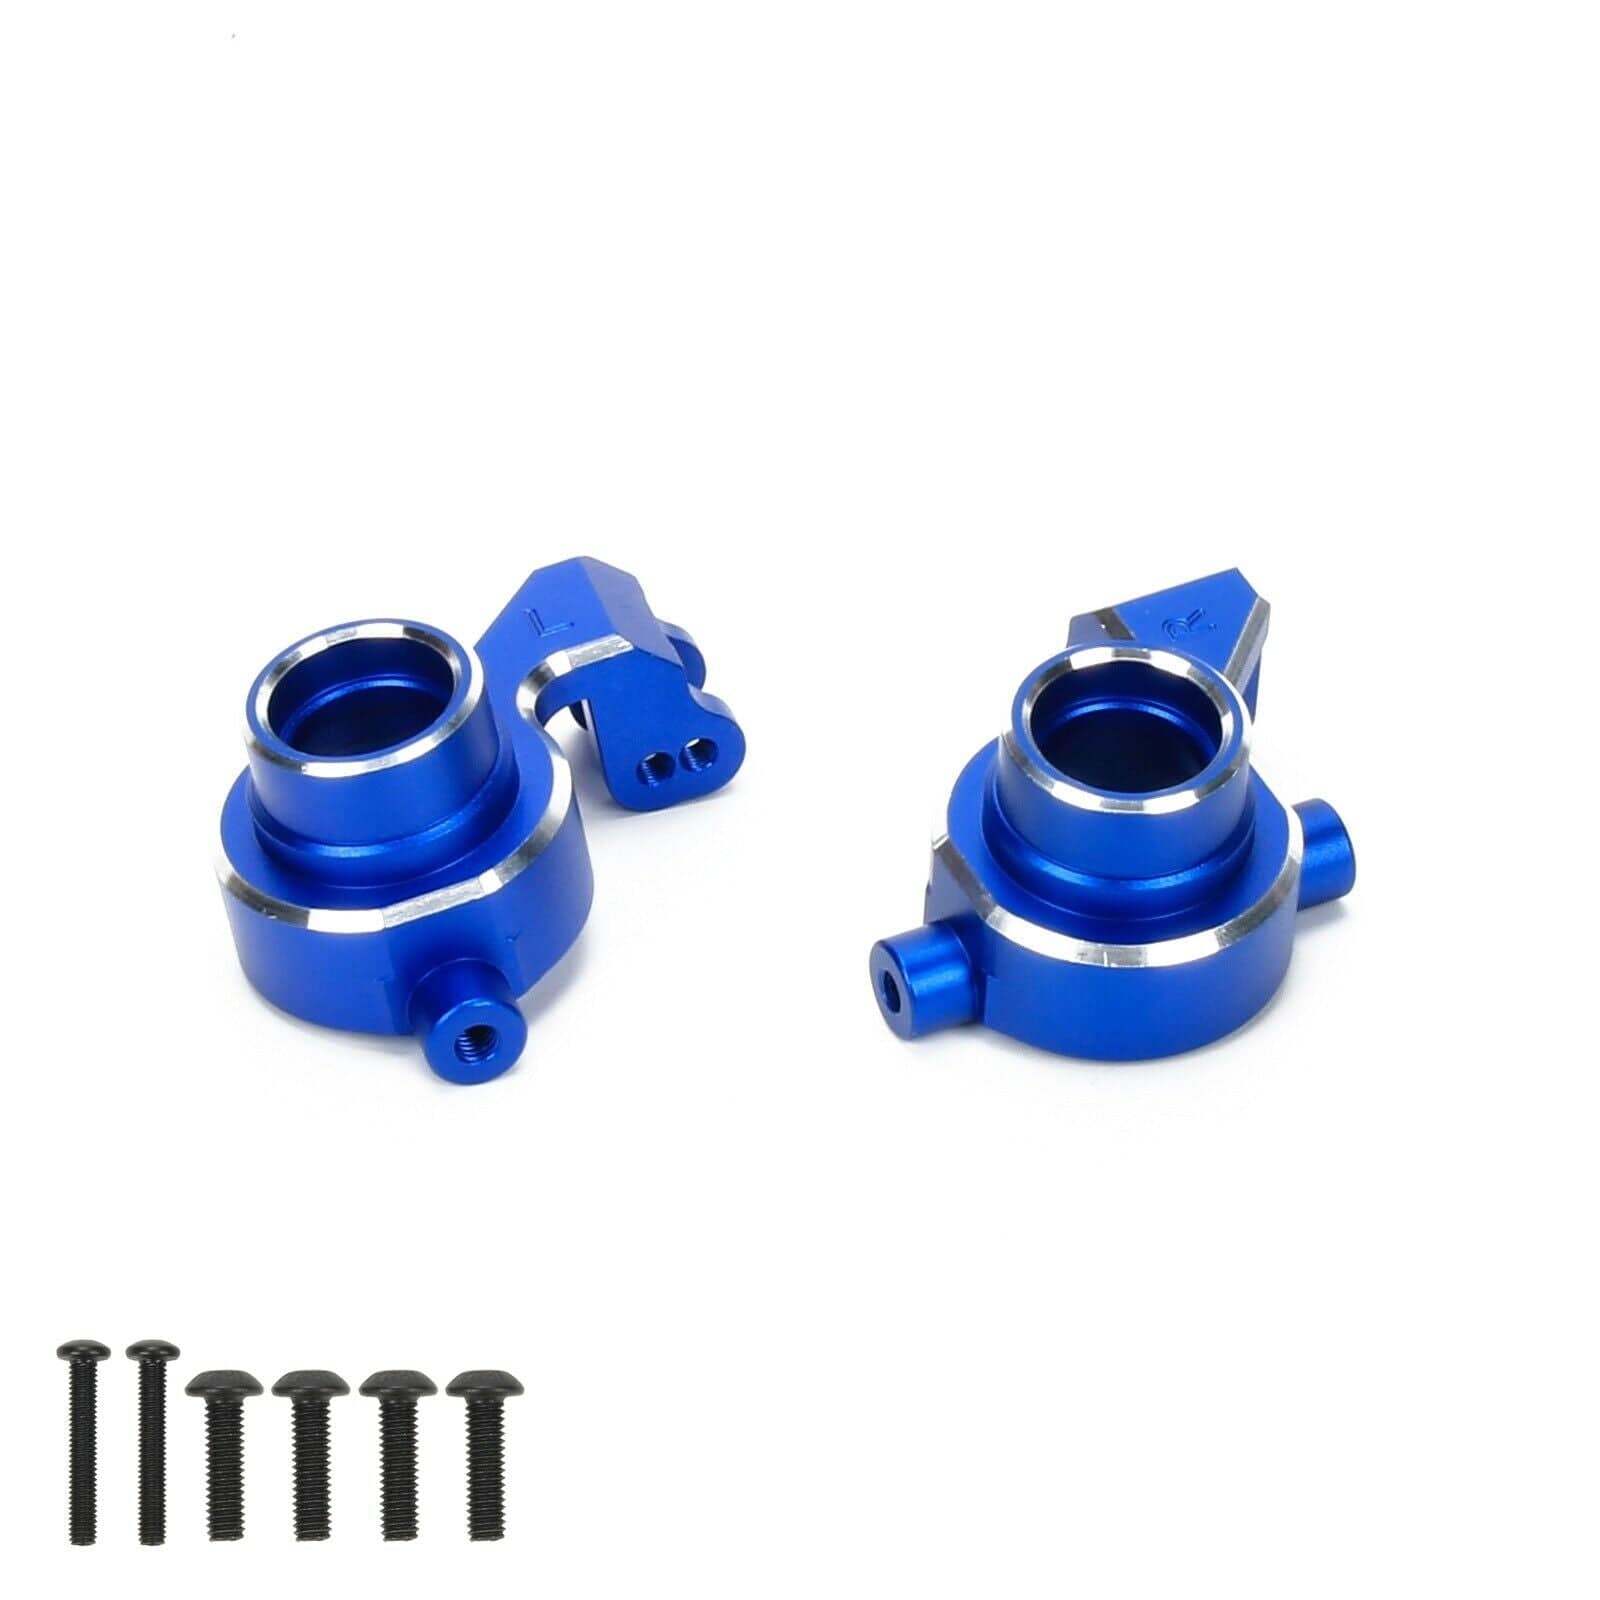 RCAWD Blue Traxxas Maxx Steering blocks left & right 8937 RCAWD